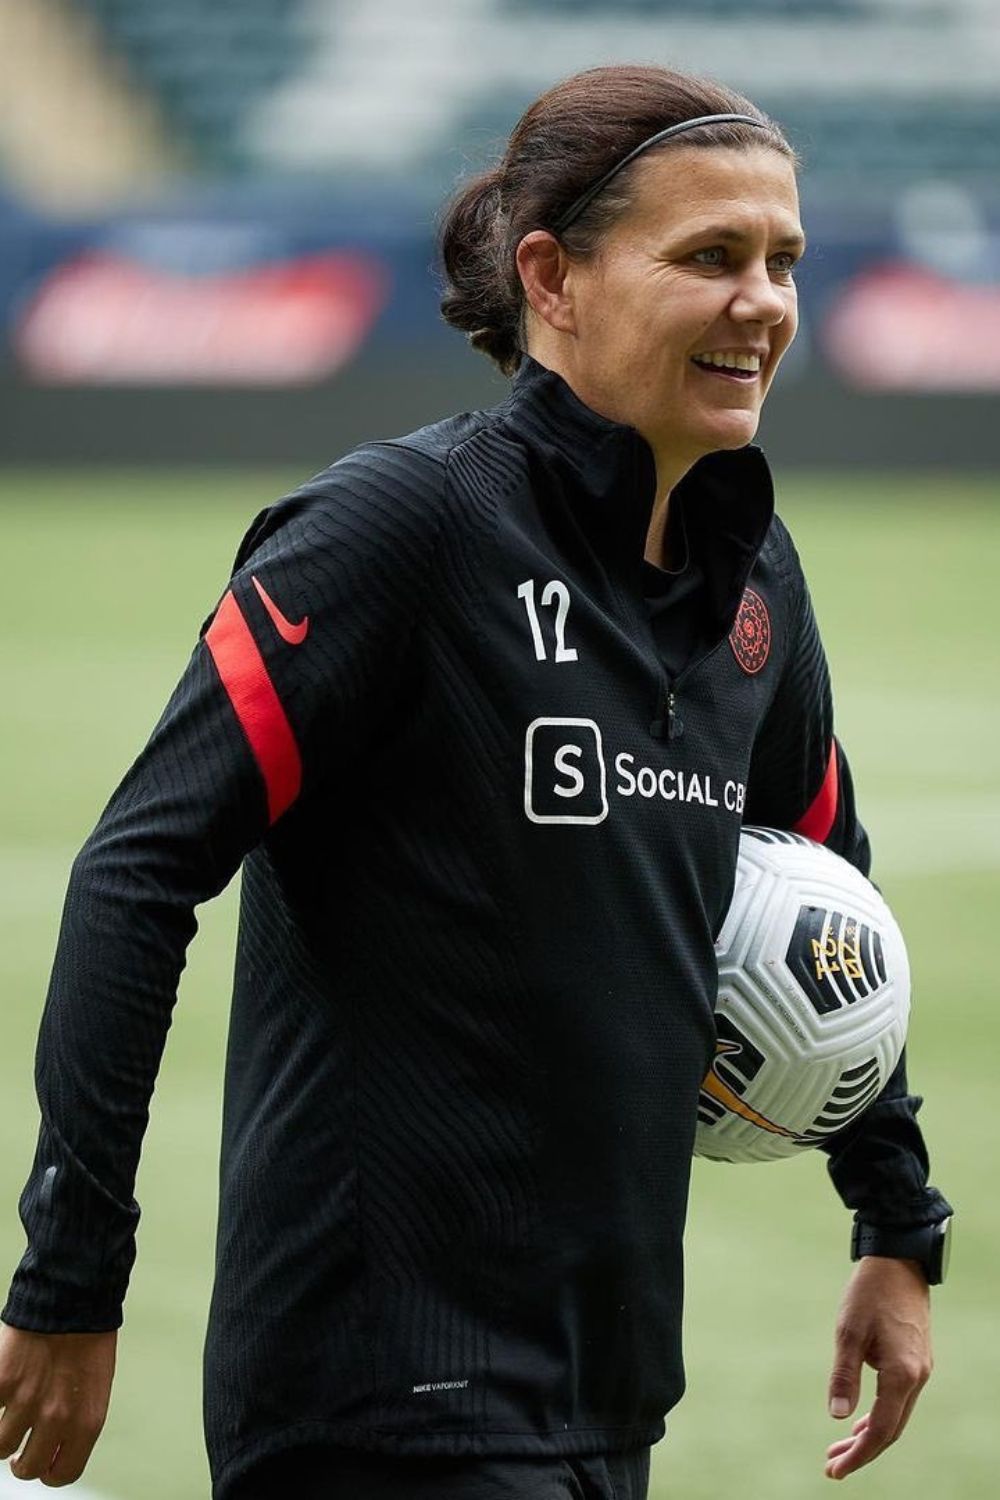 Canadian Soccer Player, Christine Sinclair